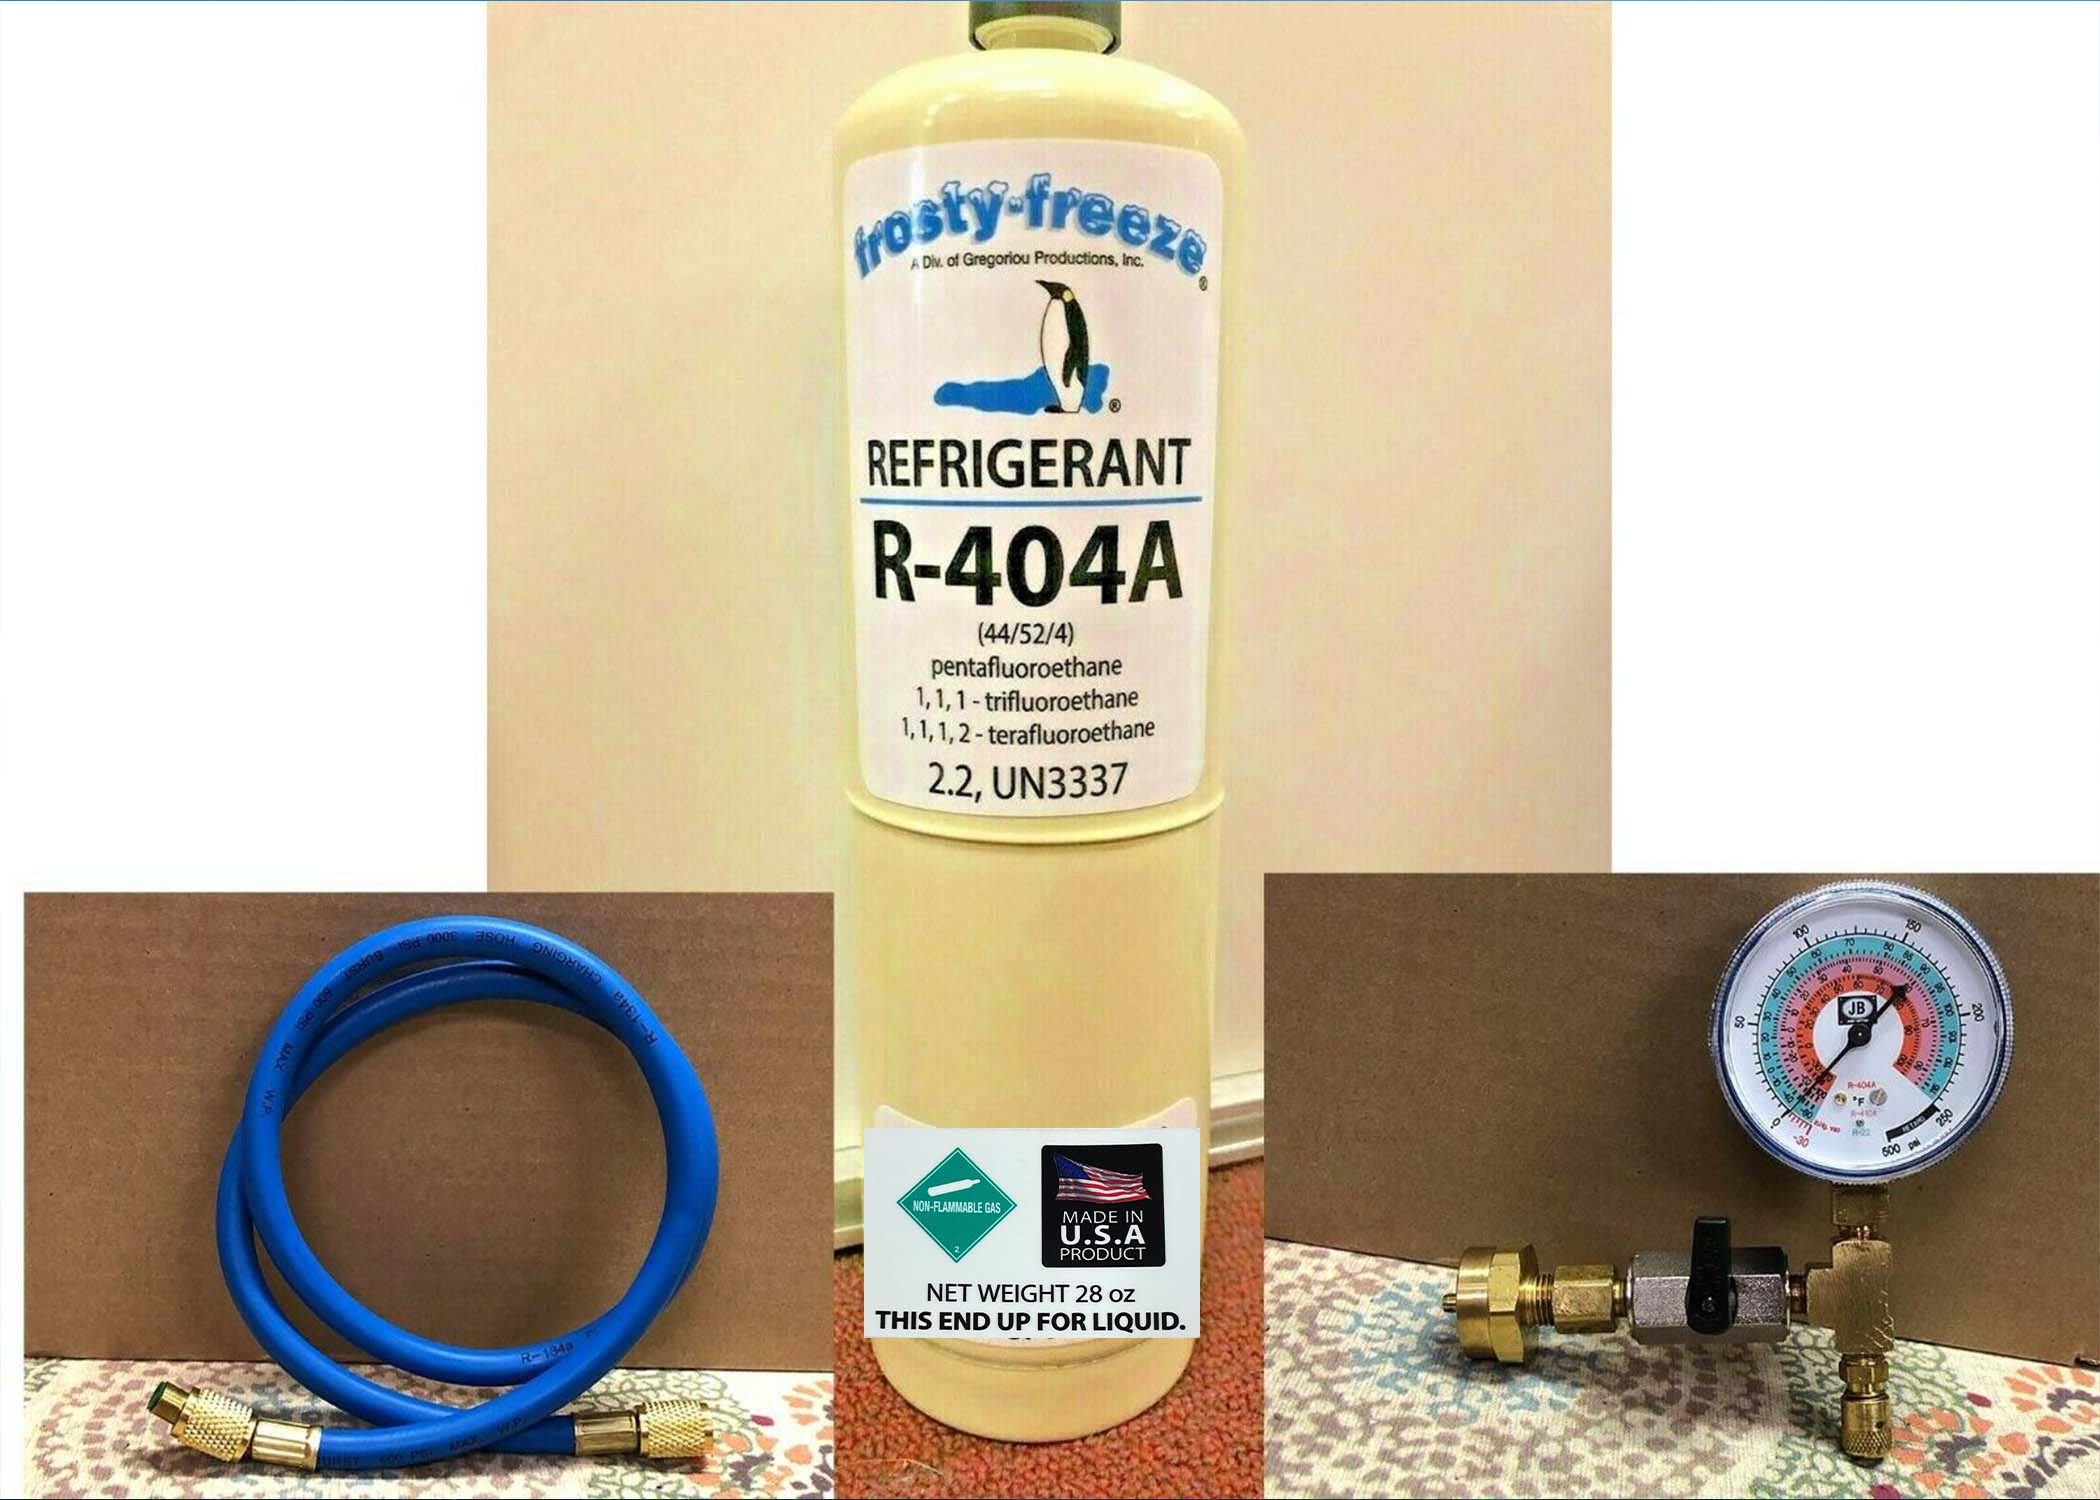 Wine Cooler, R410a Refrigerant Recharge Kit, 28 oz., w/Check & Charge-It  Gauge